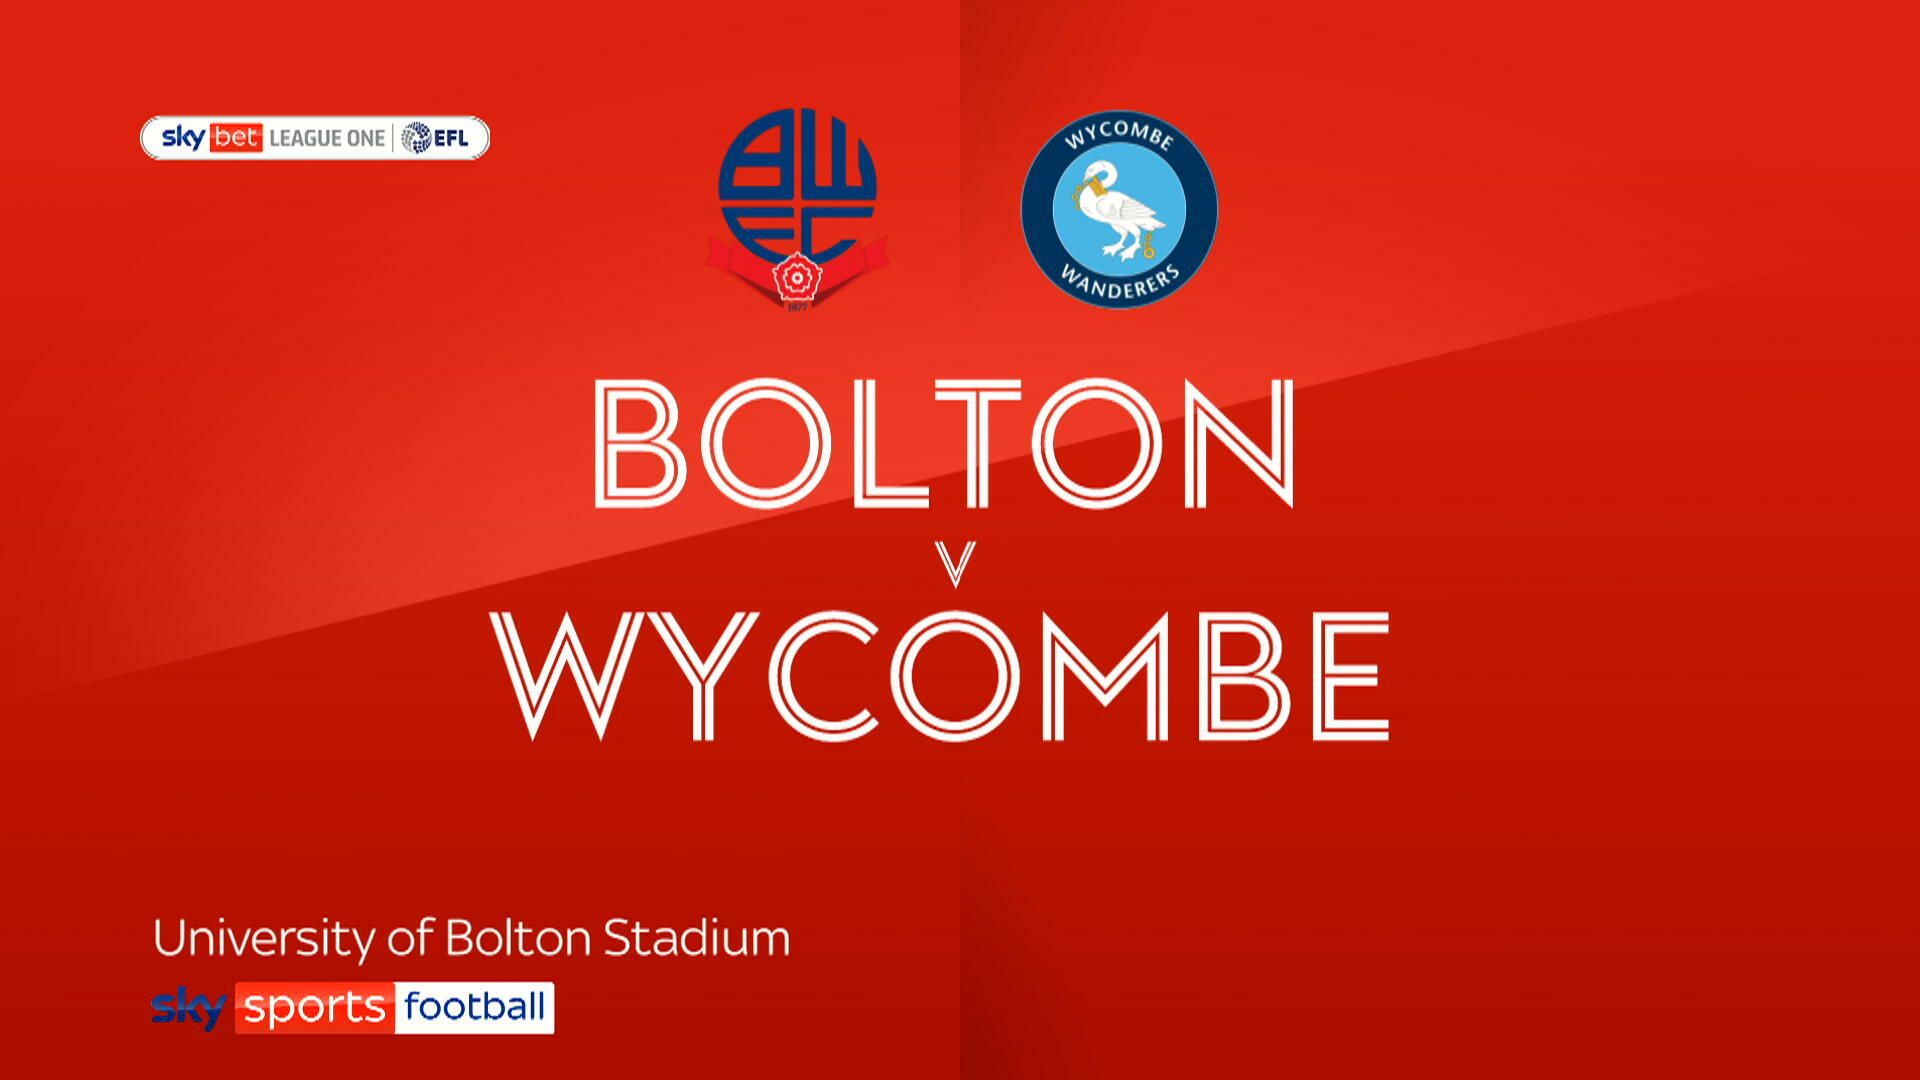 Bolton 3-0 Wycombe: Kyle Dempsey scores twice in Wanderers win